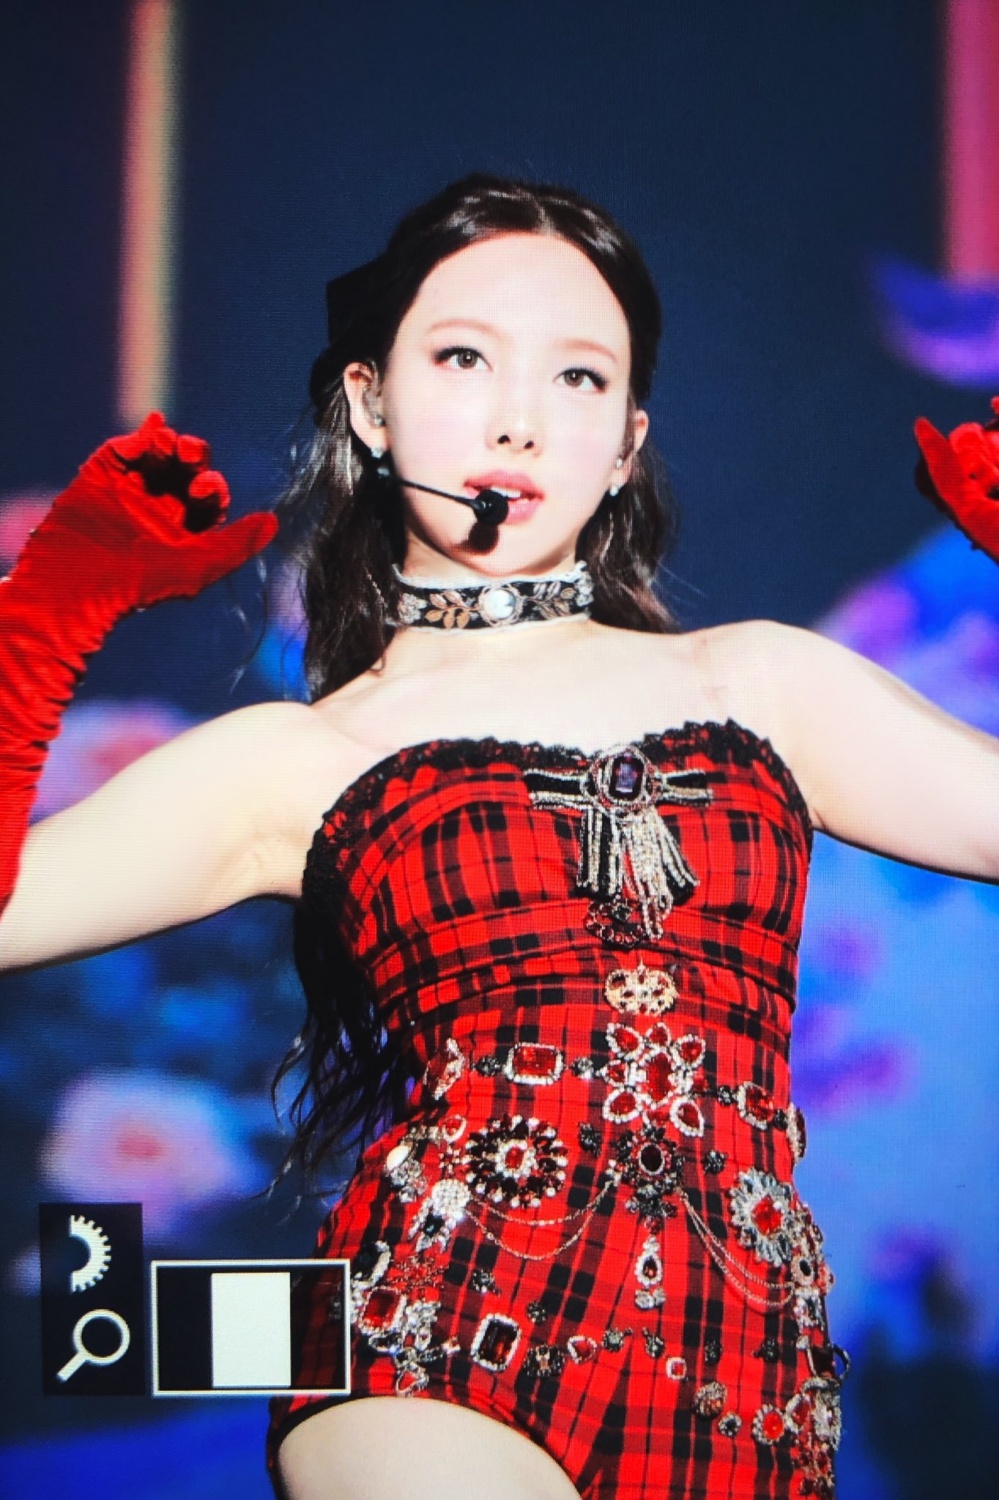 Nayeon Kpop Idol Clothes Women Concert Outfits Stage Performance